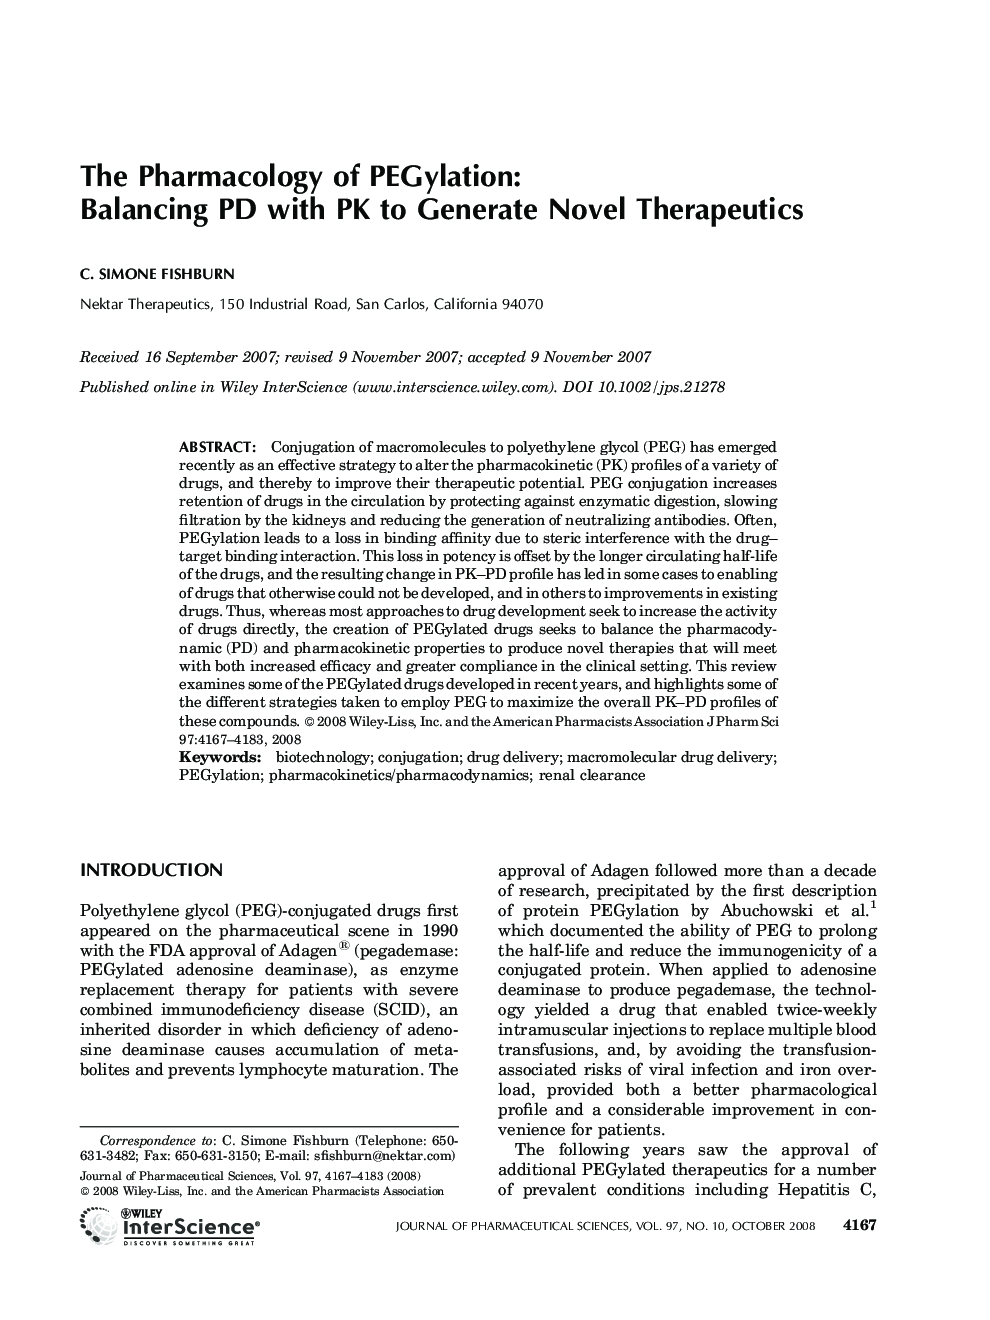 The Pharmacology of PEGylation: Balancing PD with PK to Generate Novel Therapeutics